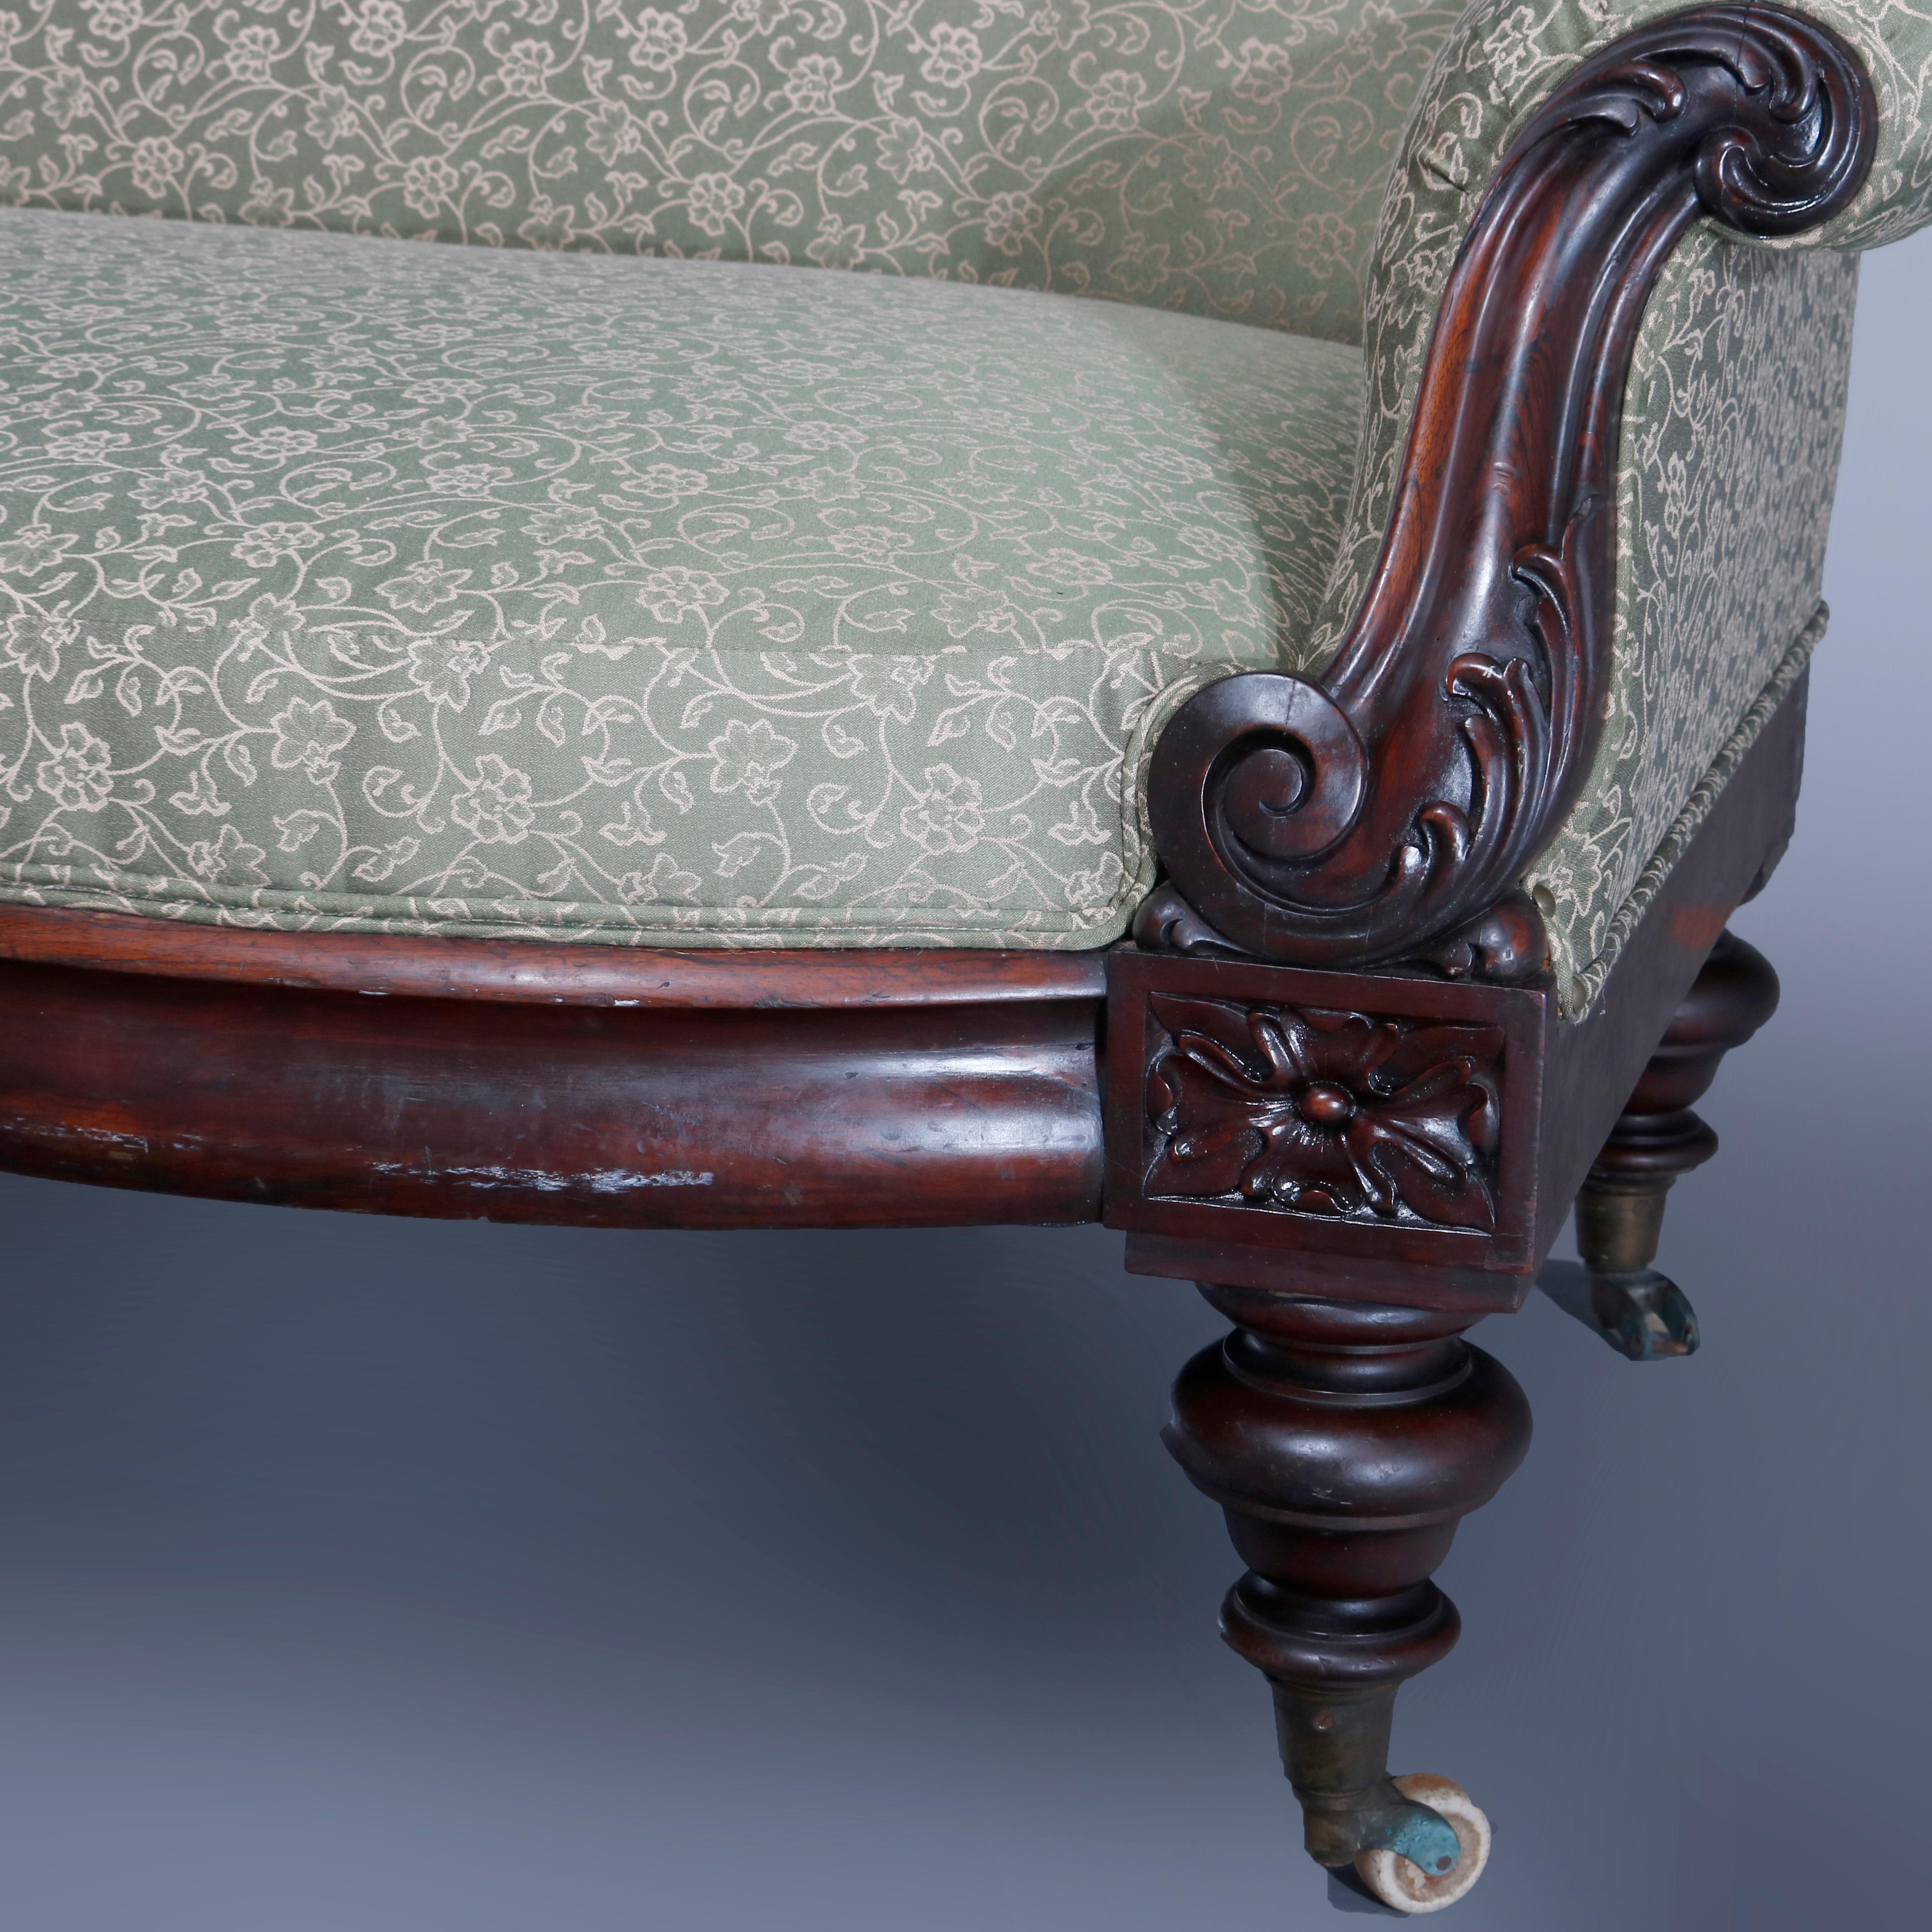 Upholstery Antique Victorian French Rococo Carved Rosewood Upholstered Sofa, circa 1880